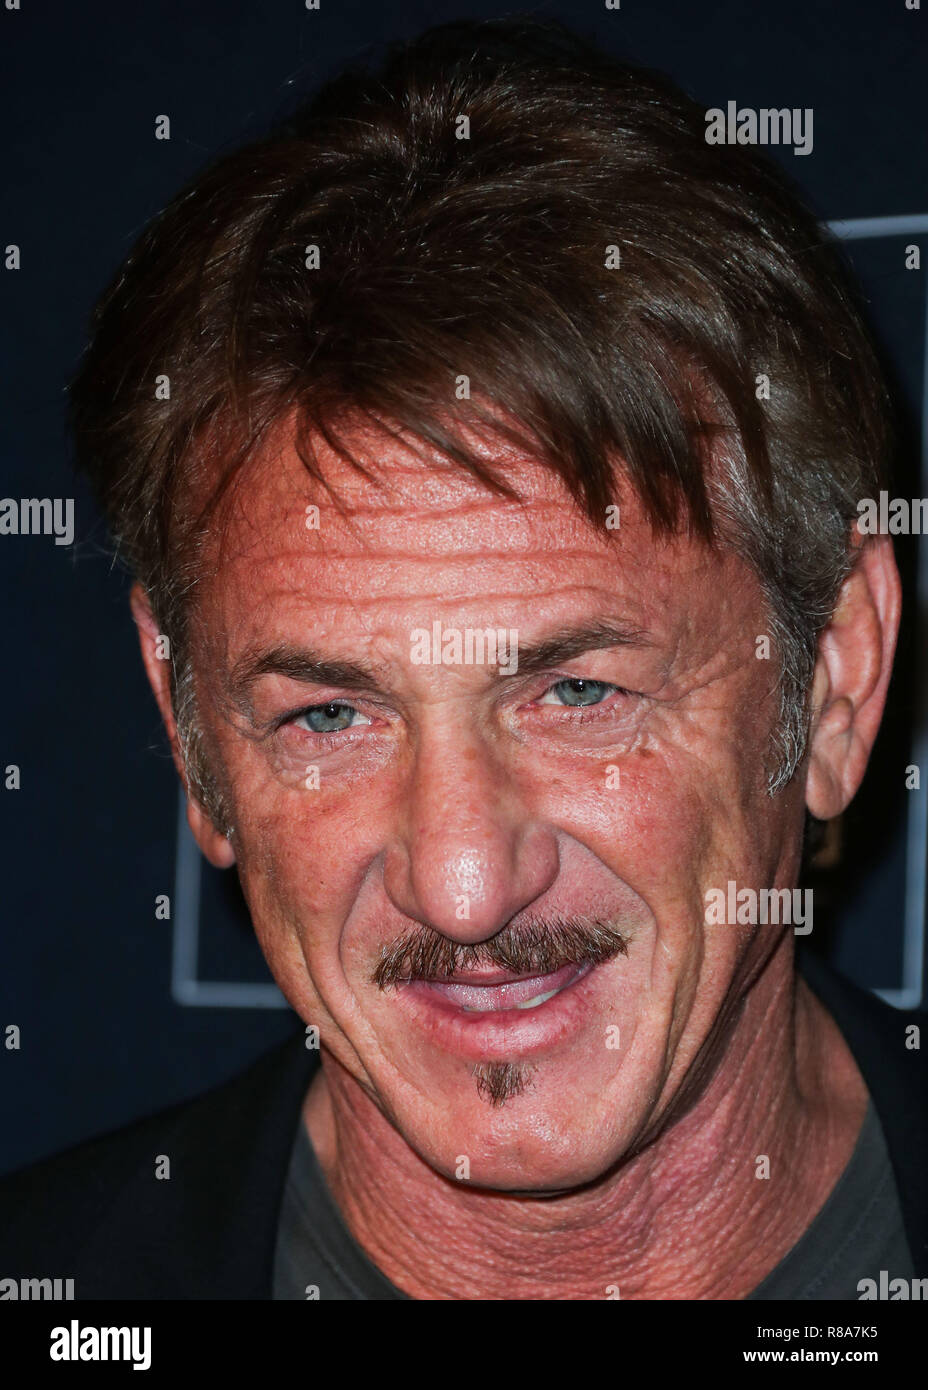 LOS ANGELES, CA, USA - OCTOBER 20: Sean Penn at the GO Campaign Gala 2018 held at the City Market Social House on October 20, 2018 in Los Angeles, California, United States. (Photo by Xavier Collin/Image Press Agency) Stock Photo